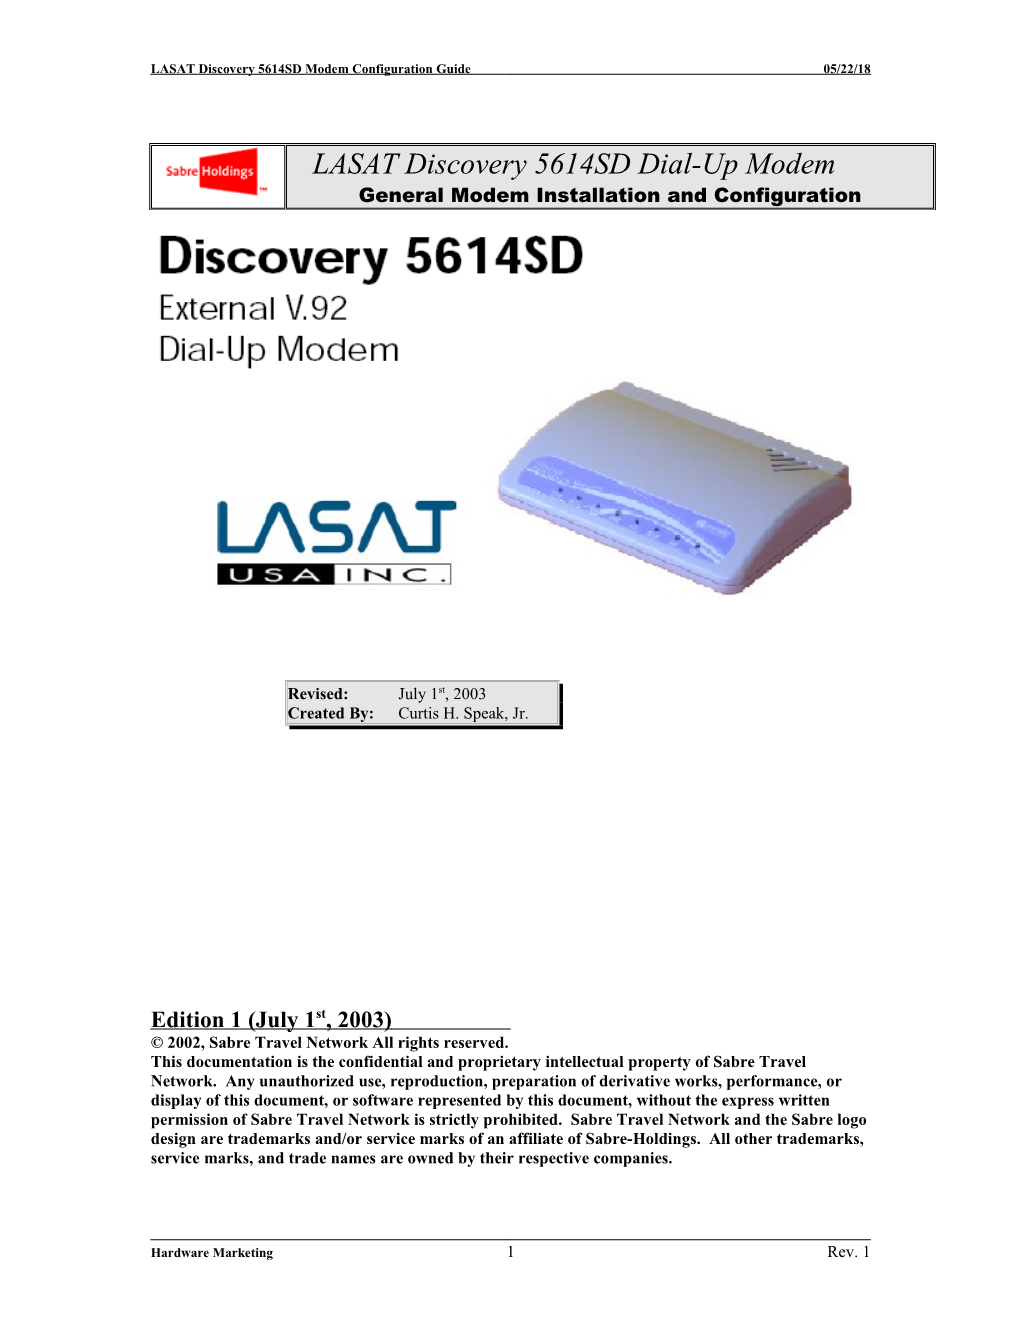 LASAT Discovery 5614SD Modem Configuration Guide 07/01/03